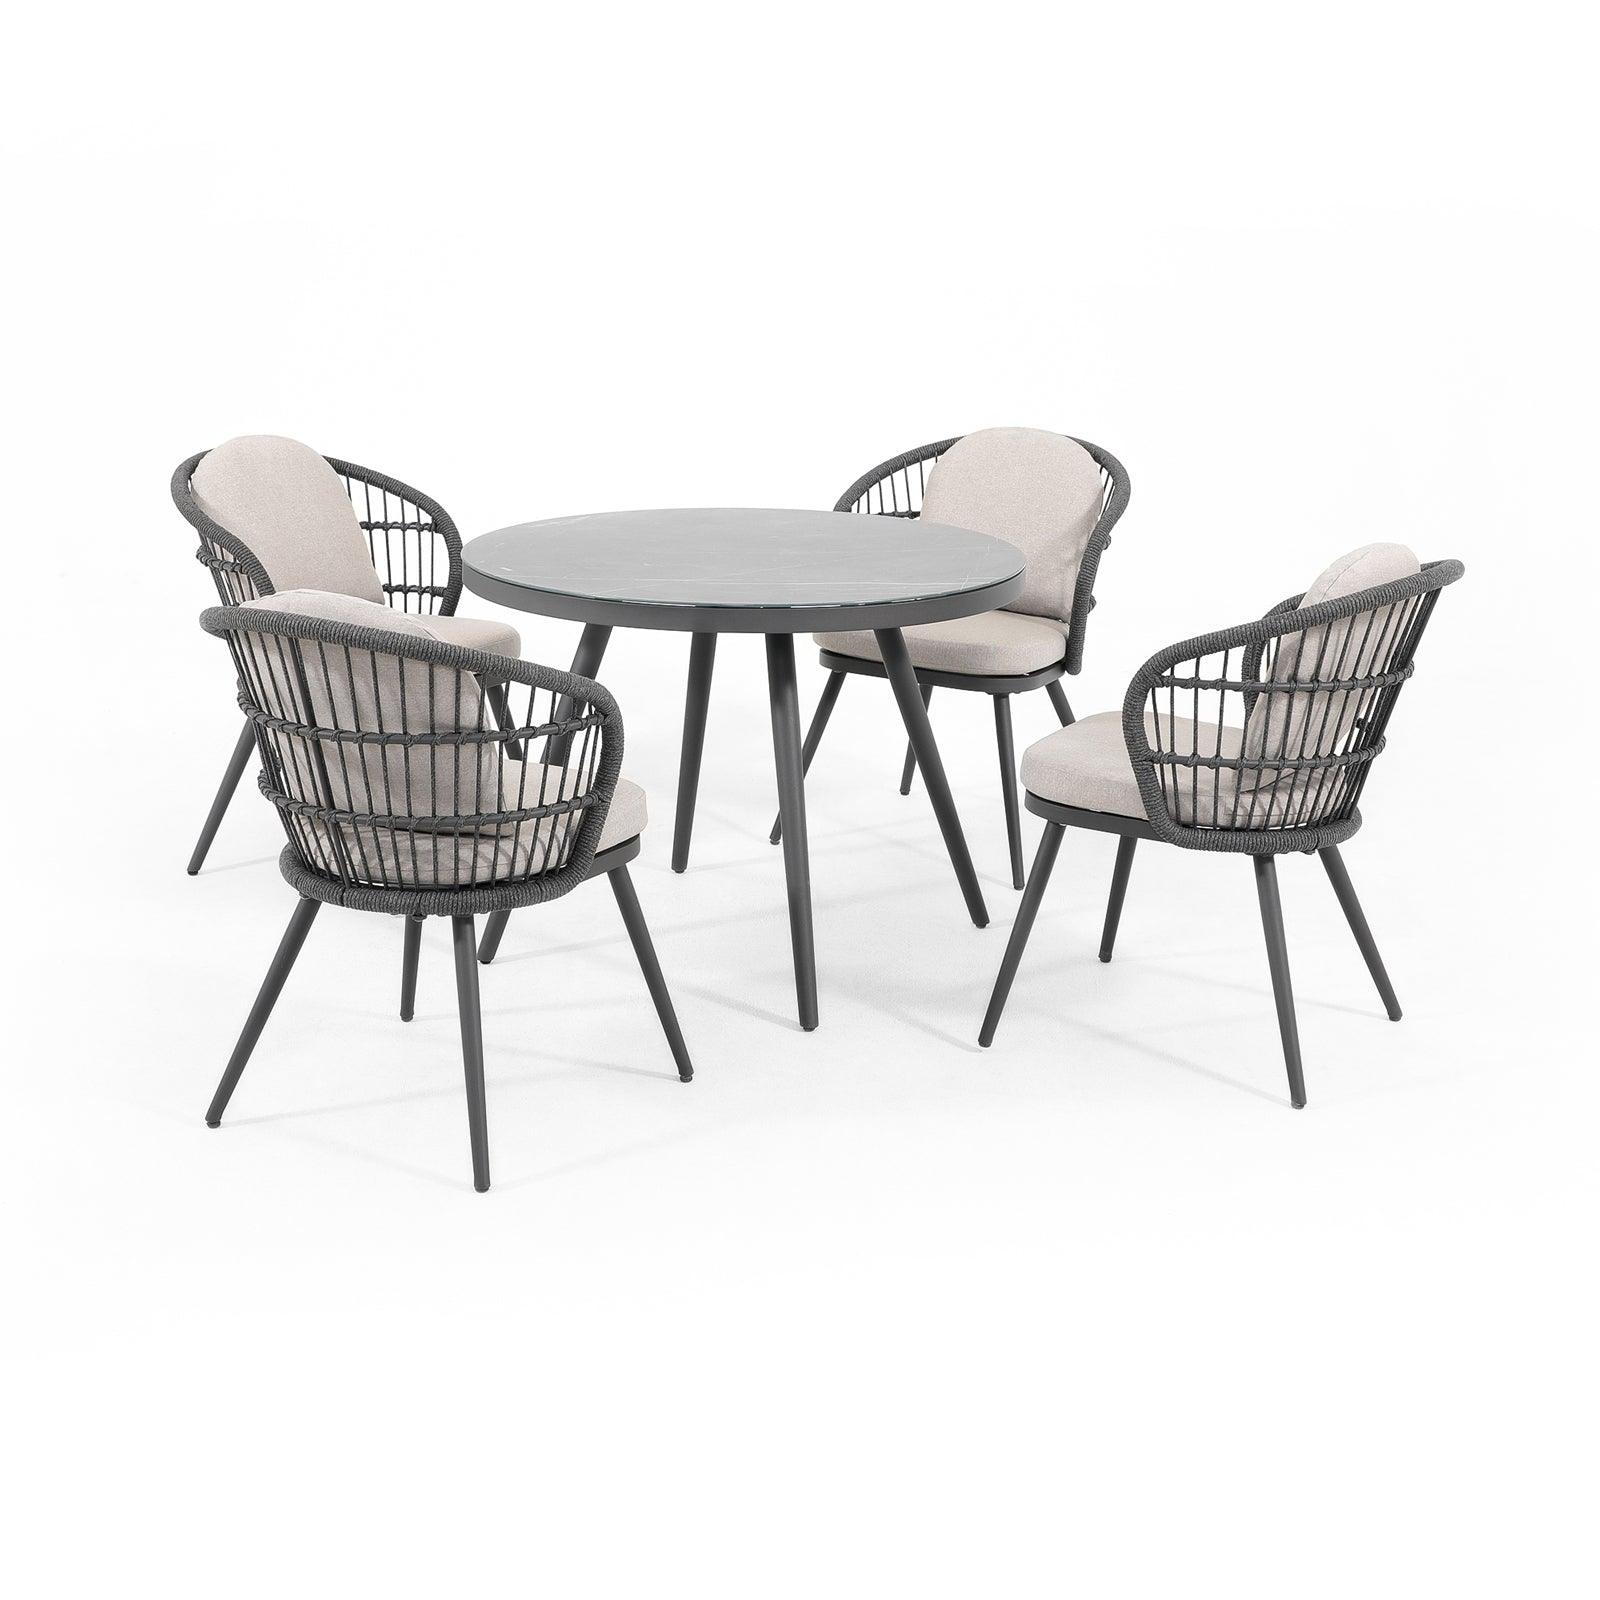 Comino Modern Rope Outdoor Furniture, dark grey outdoor Dining Set with aluminum frame, light grey cushions, 4 dining seats with rope design, 1 round dining table with glass top- Jardina Furniture